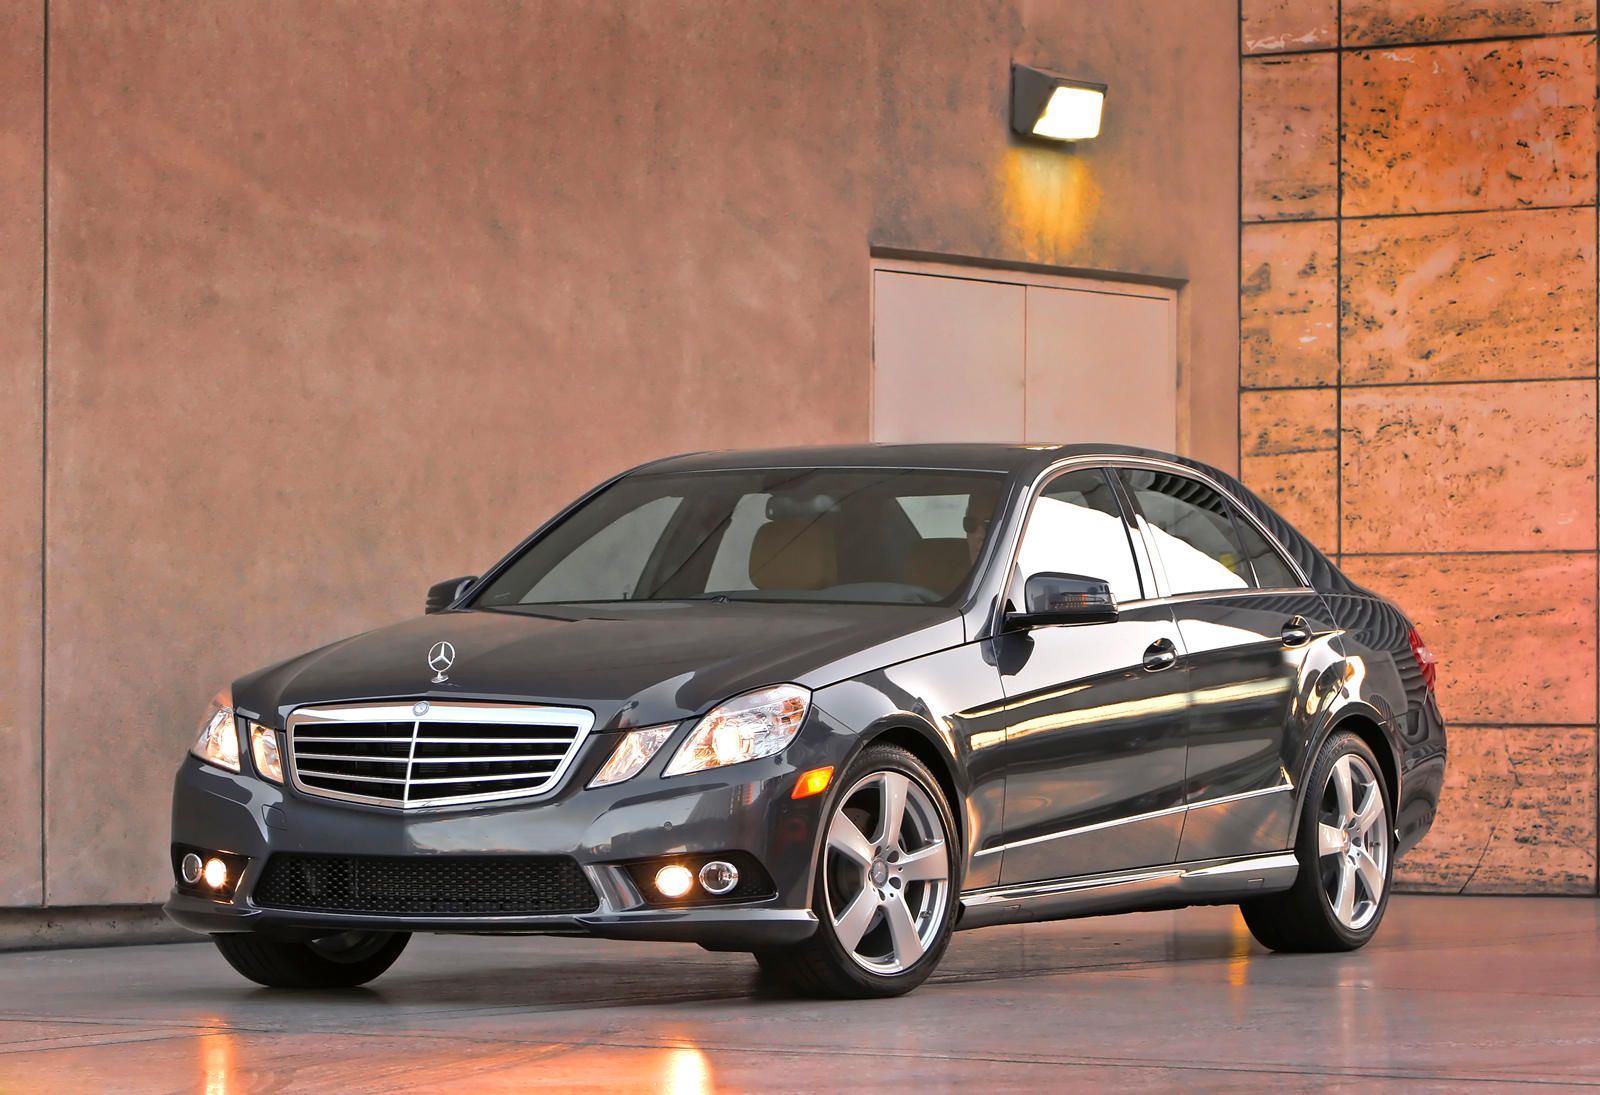 iCarData: The Best Time To Buy/Sell A Mercedes-Benz (W212) E250